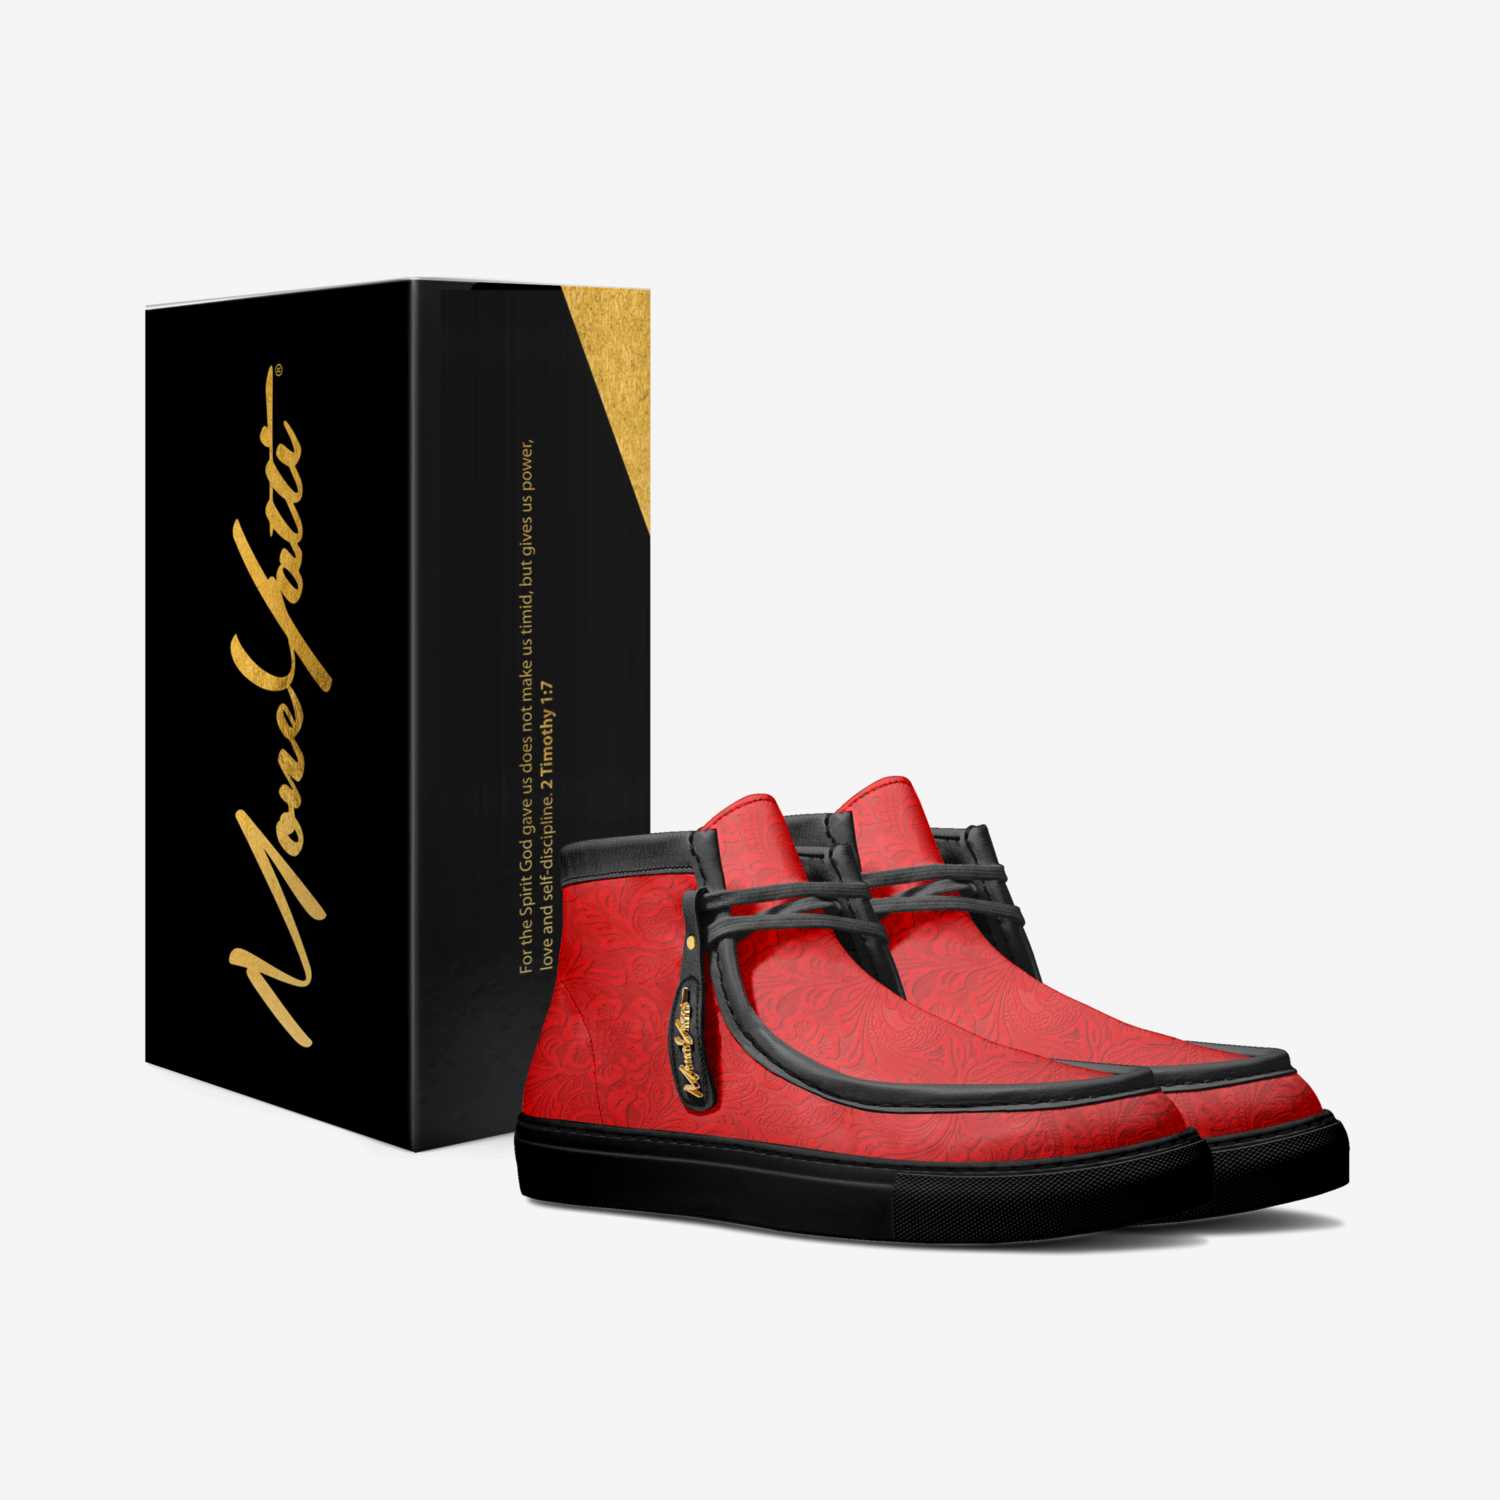 LUX 027 custom made in Italy shoes by Moneyatti Brand | Box view